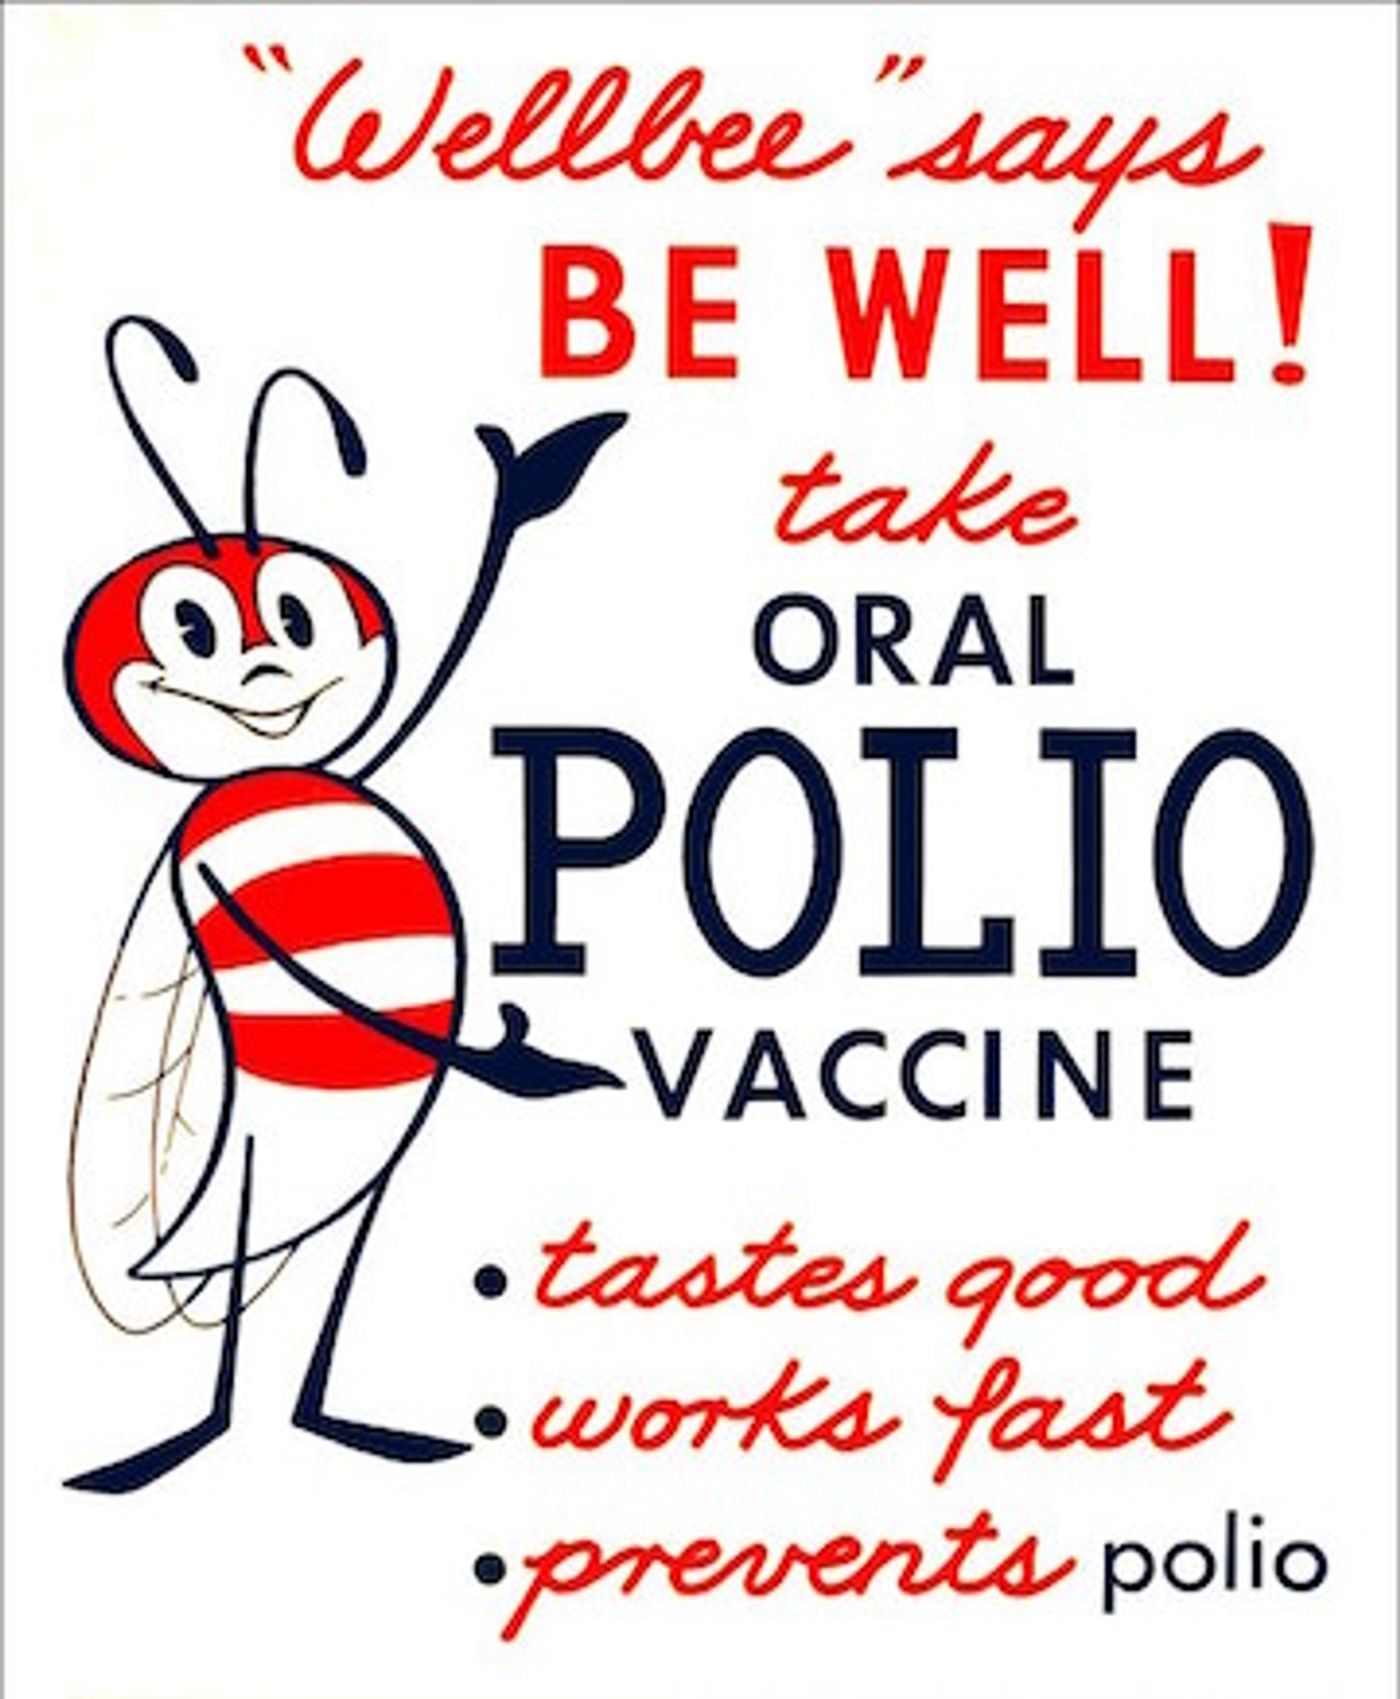 A 1963 poster for the polio vaccine